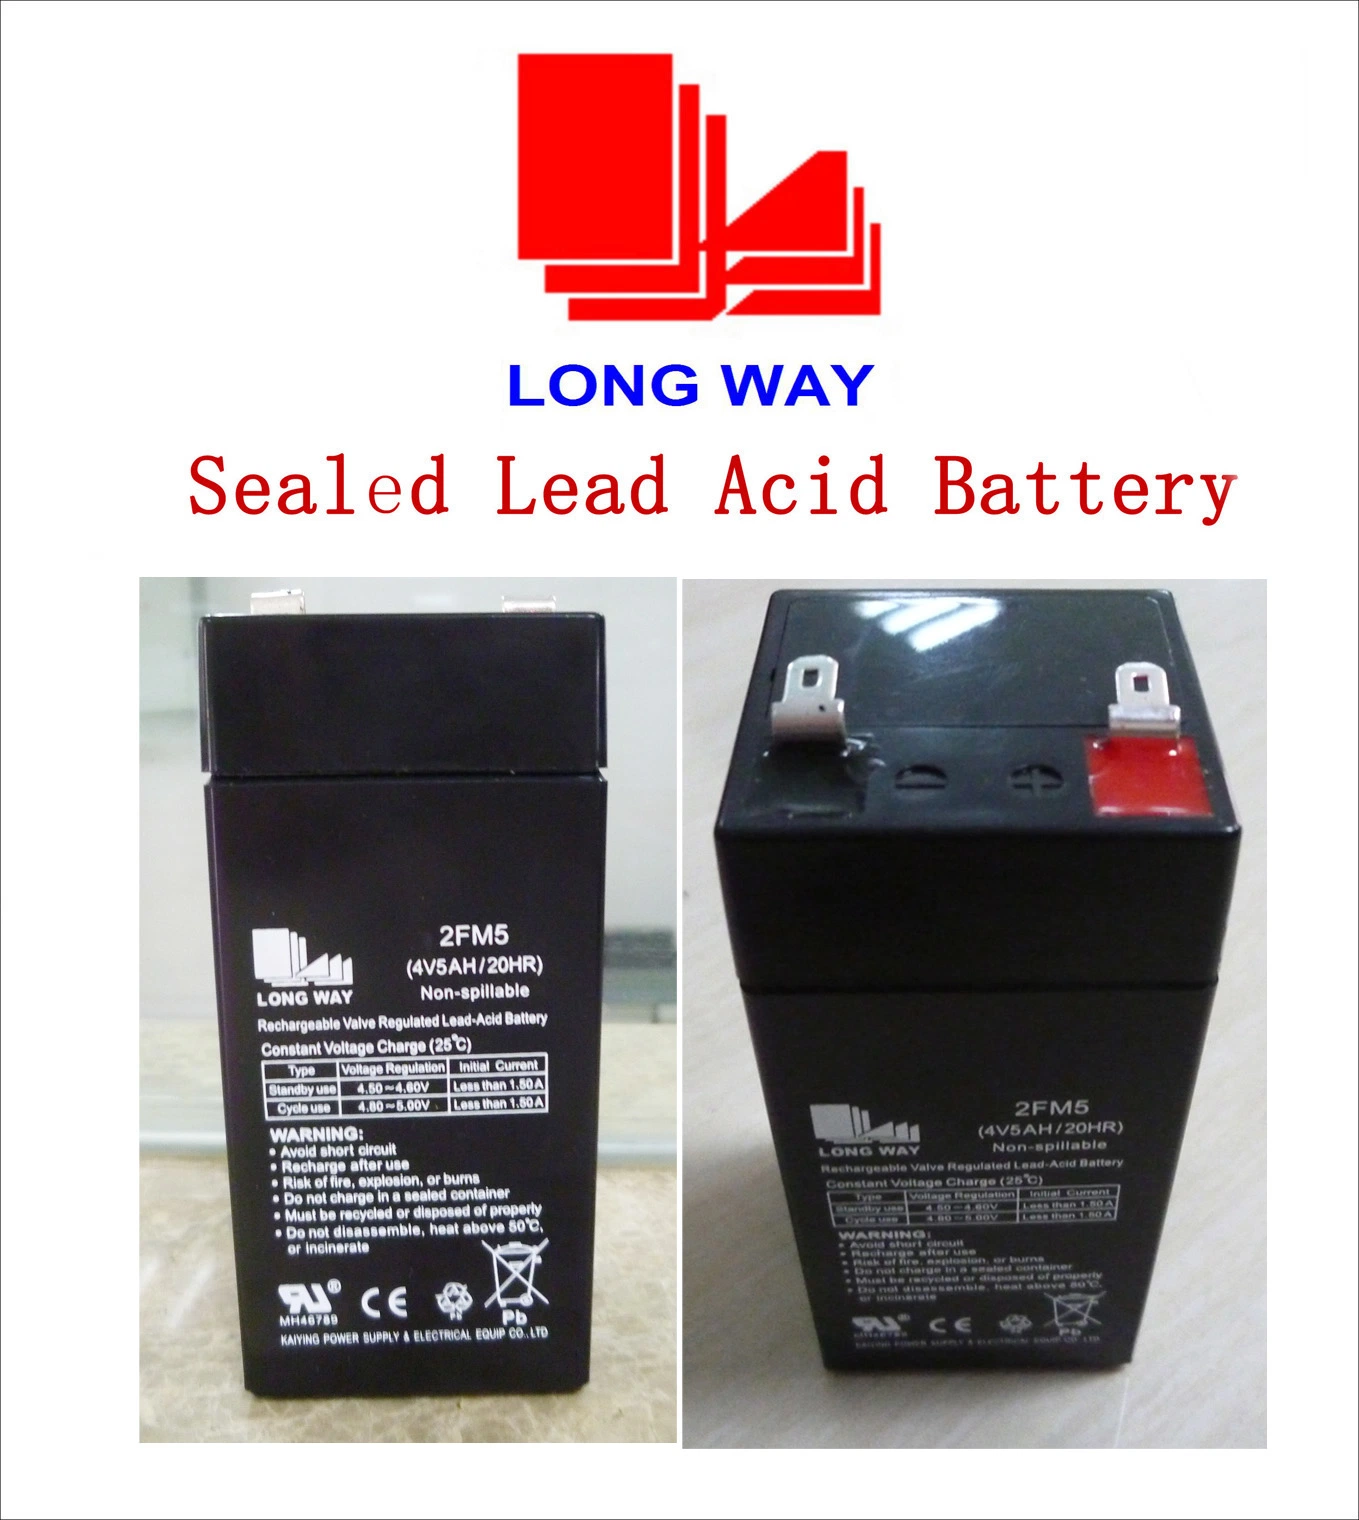 4V5ah Battery Tools Scale Rechargeable Battery Sealed Lead Acid Battery